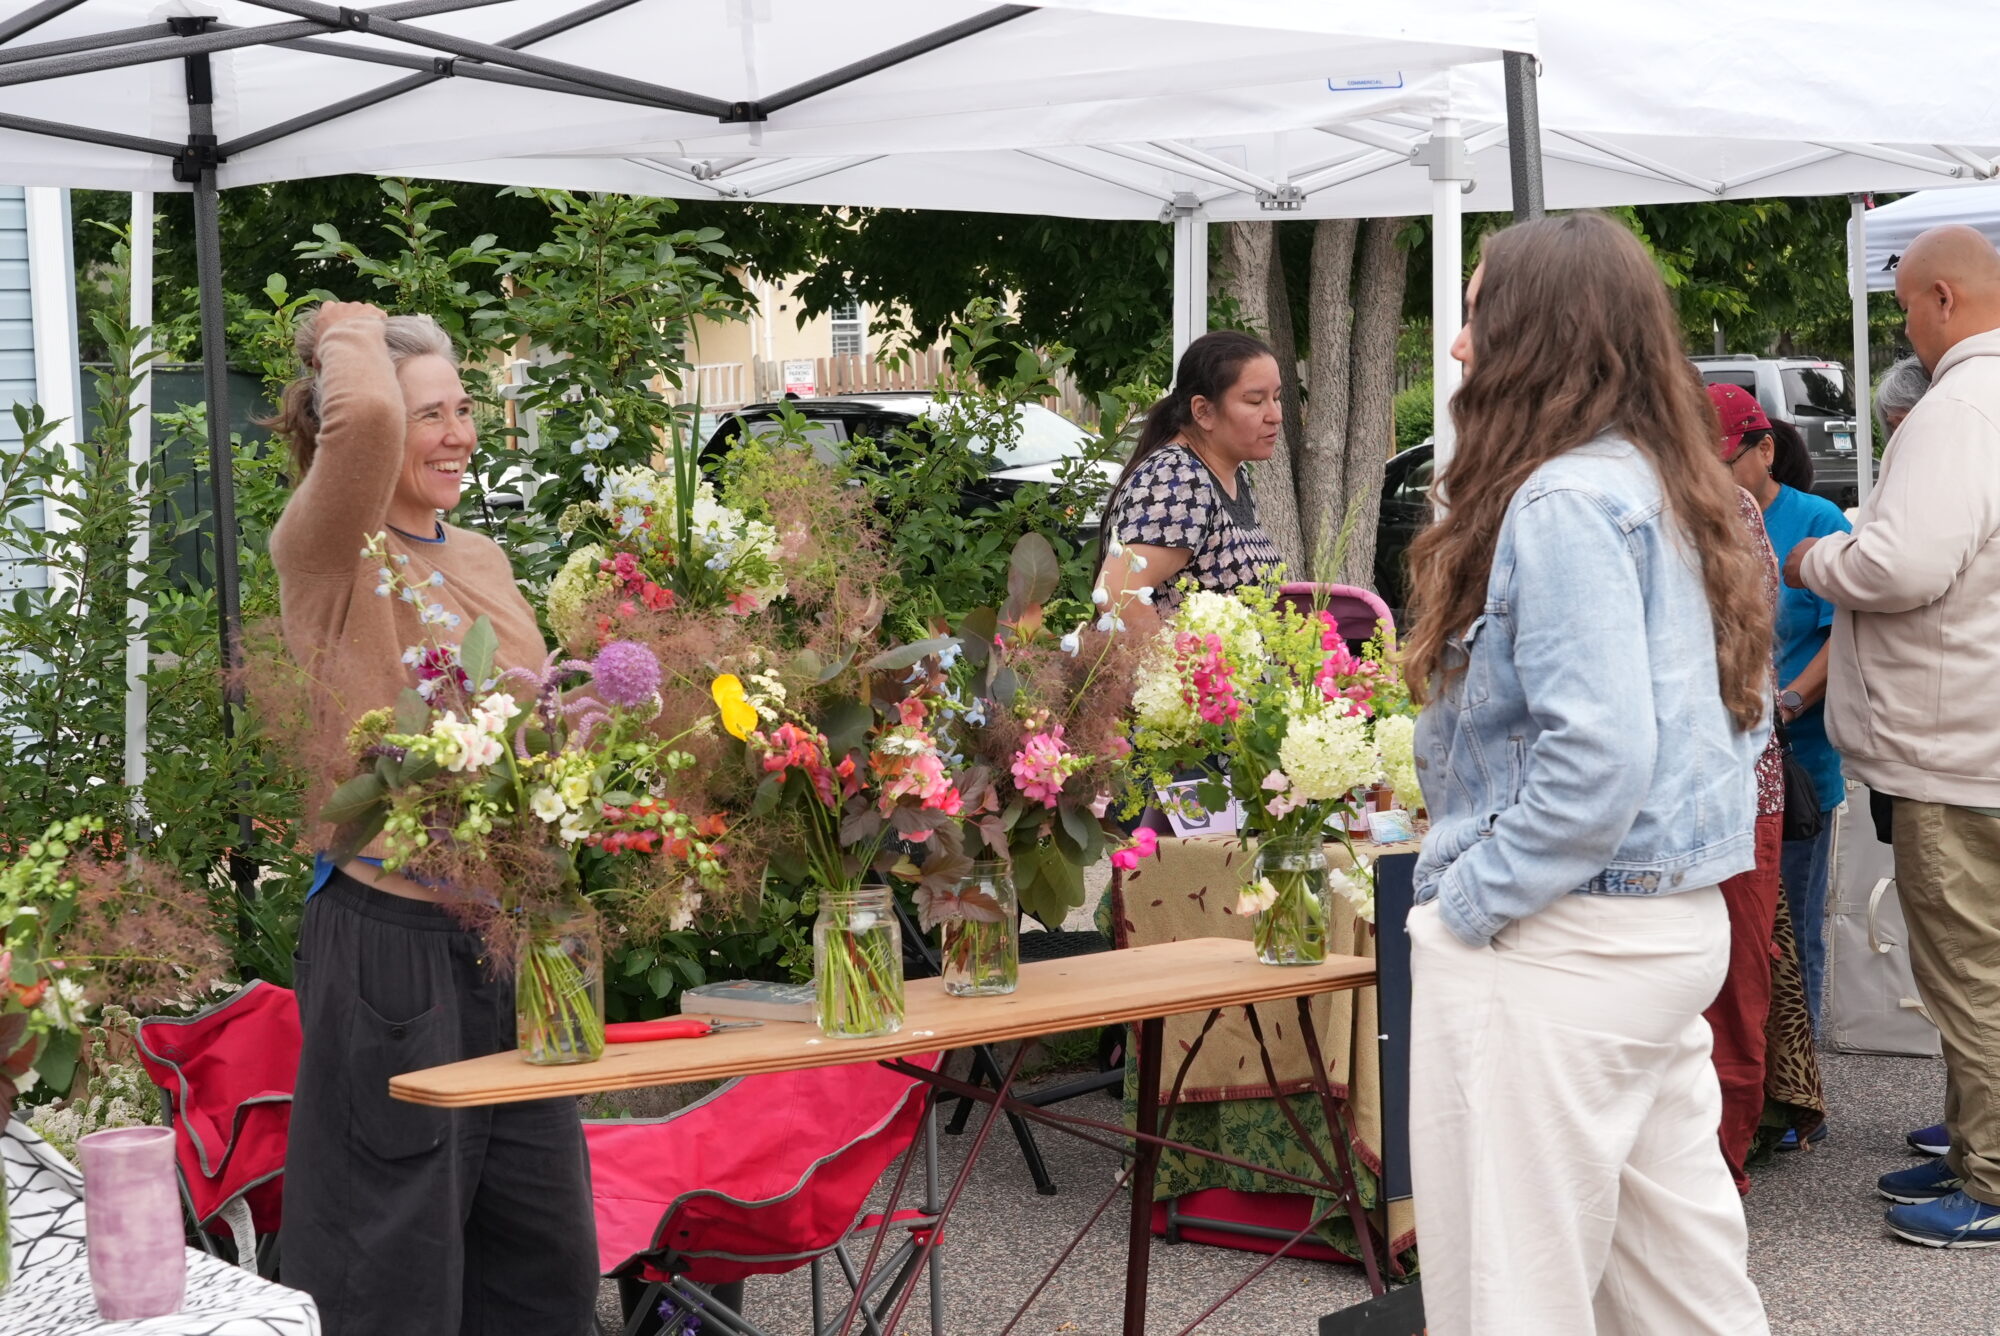 A woman selling flowers chats and smiles at a customer. Other vendors chat in the background